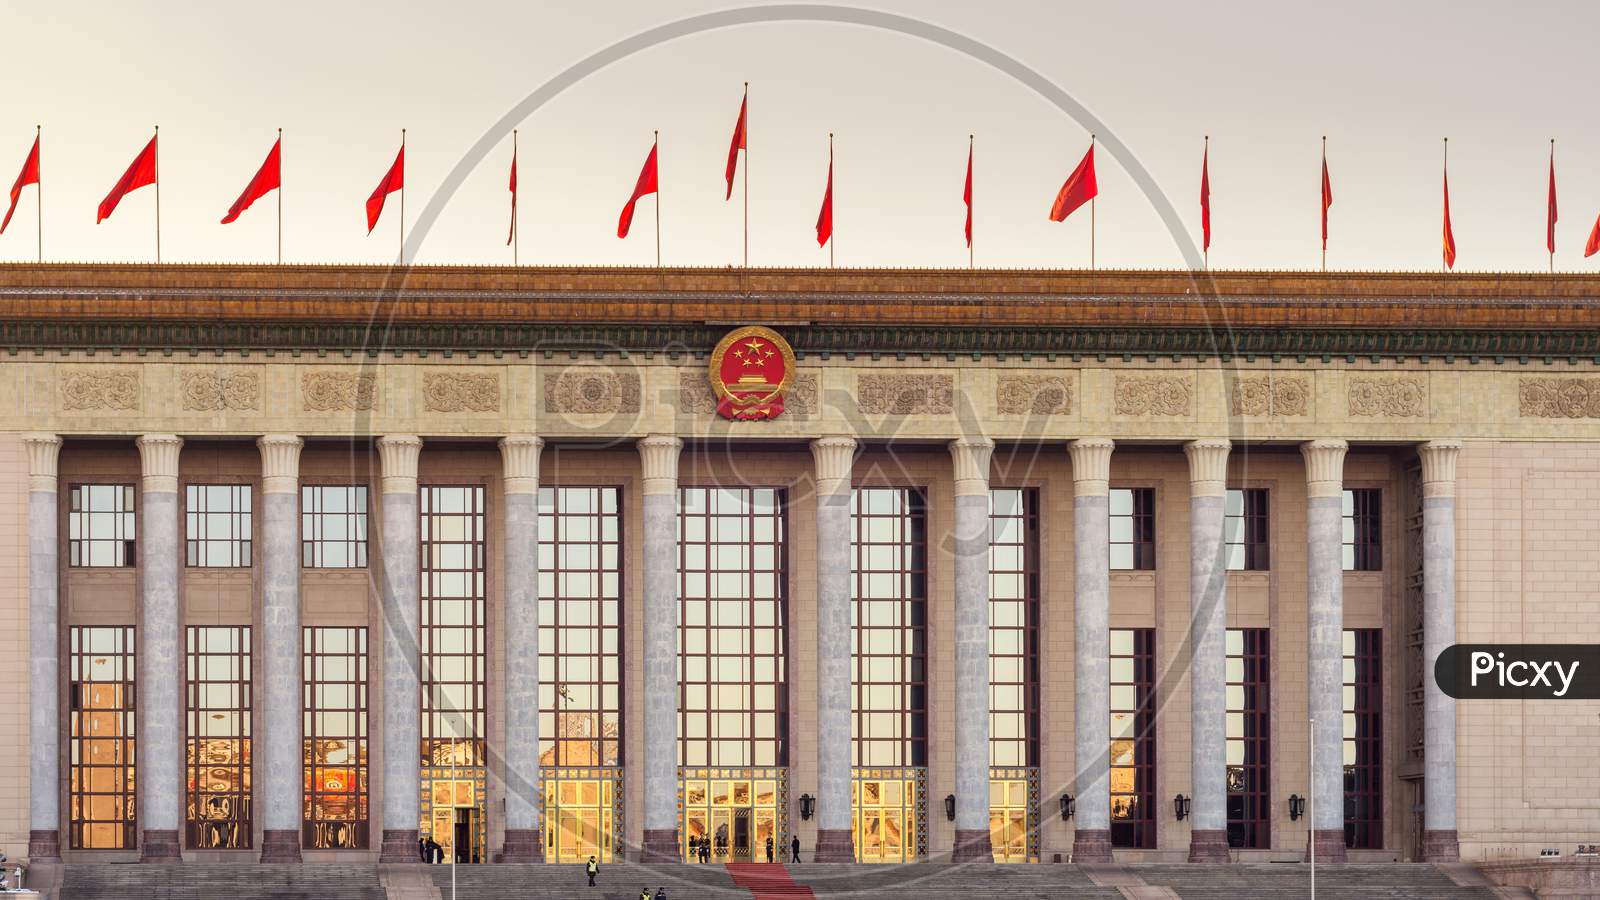 National Peoples Of The Peoples Republic Of China In Beijing